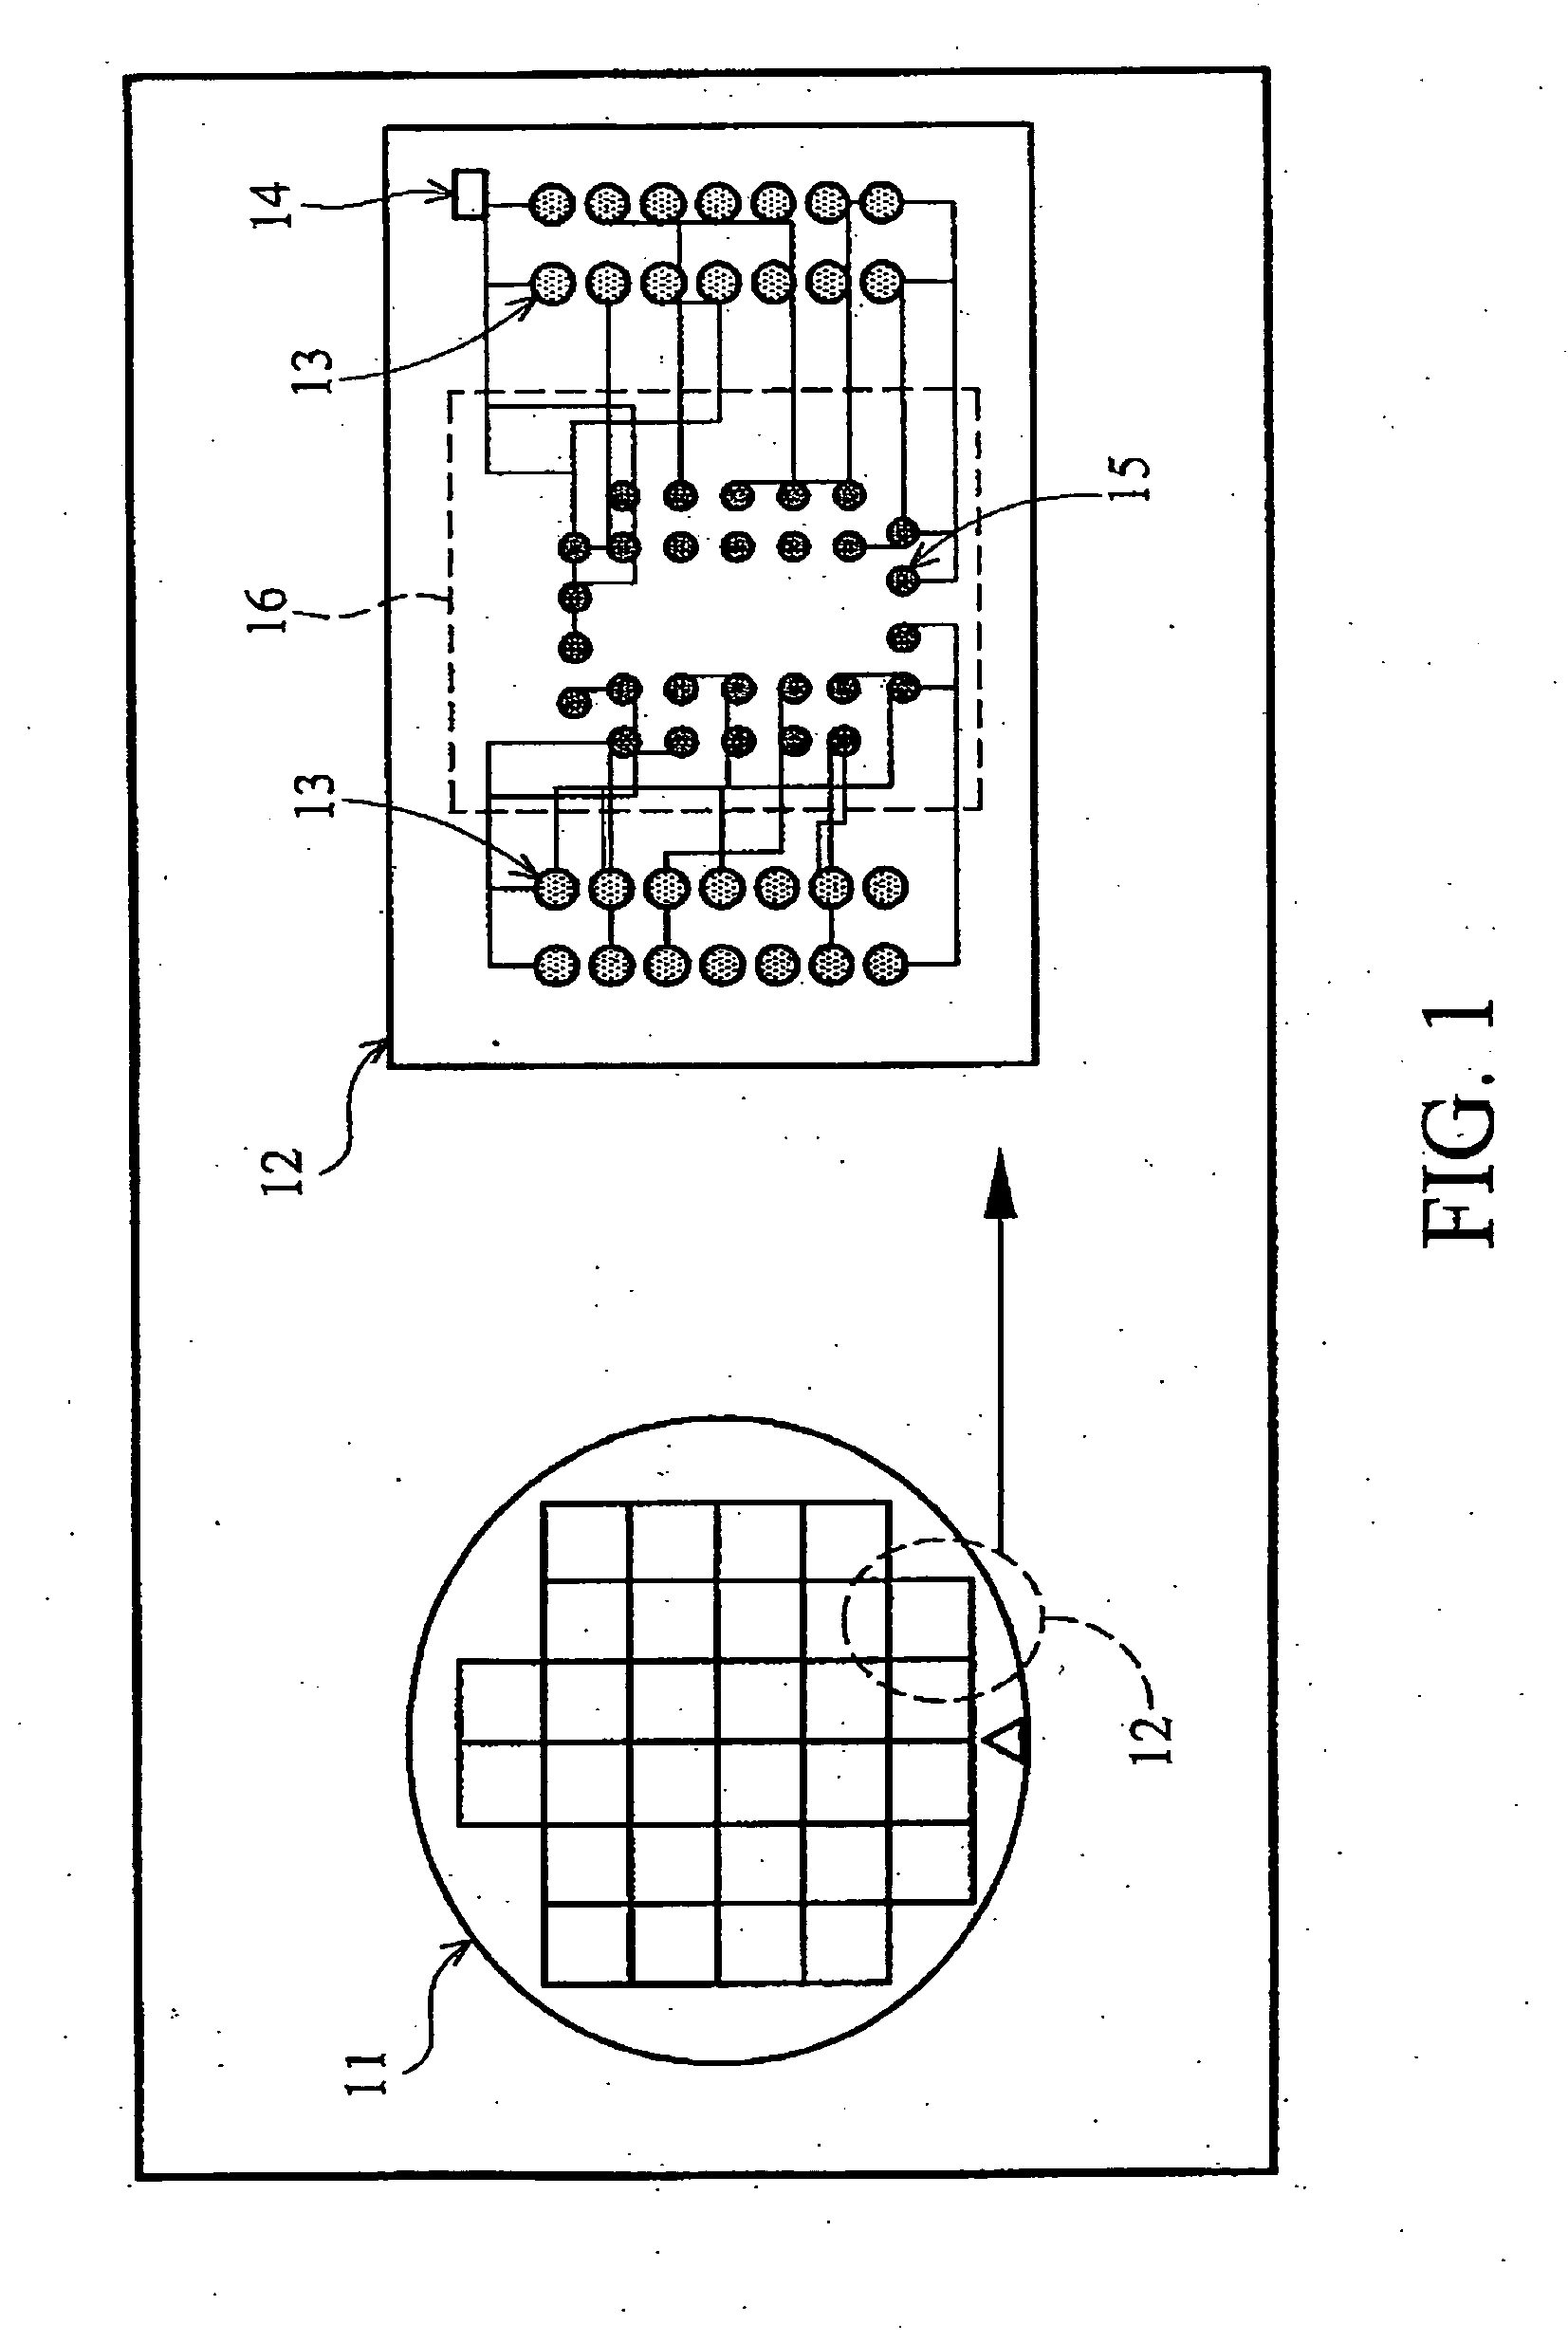 Batch-test system with a chip tray